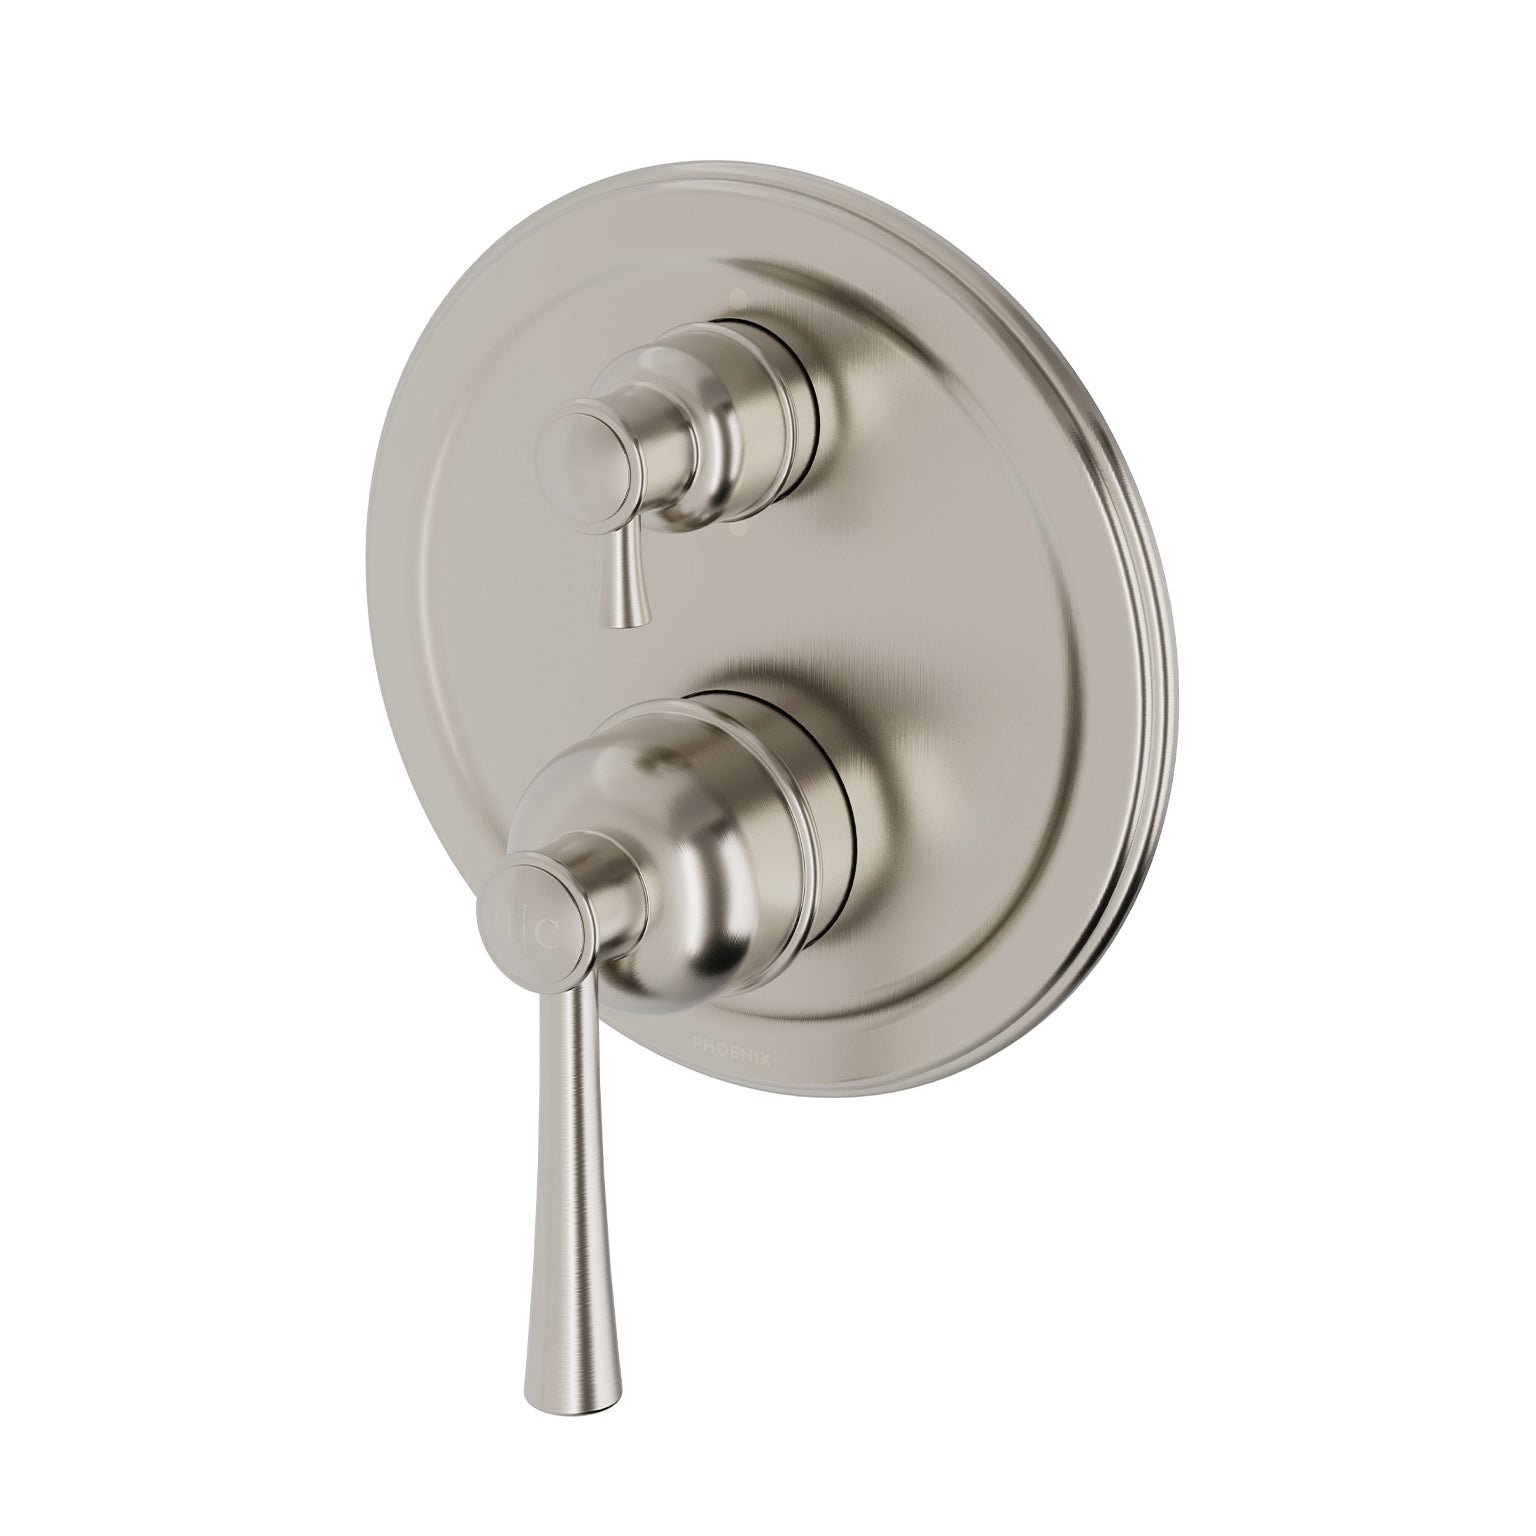 PHOENIX CROMFORD SWITCHMIX SHOWER / BATH DIVERTER MIXER FIT-OFF AND ROUGH-IN KIT BRUSHED NICKEL